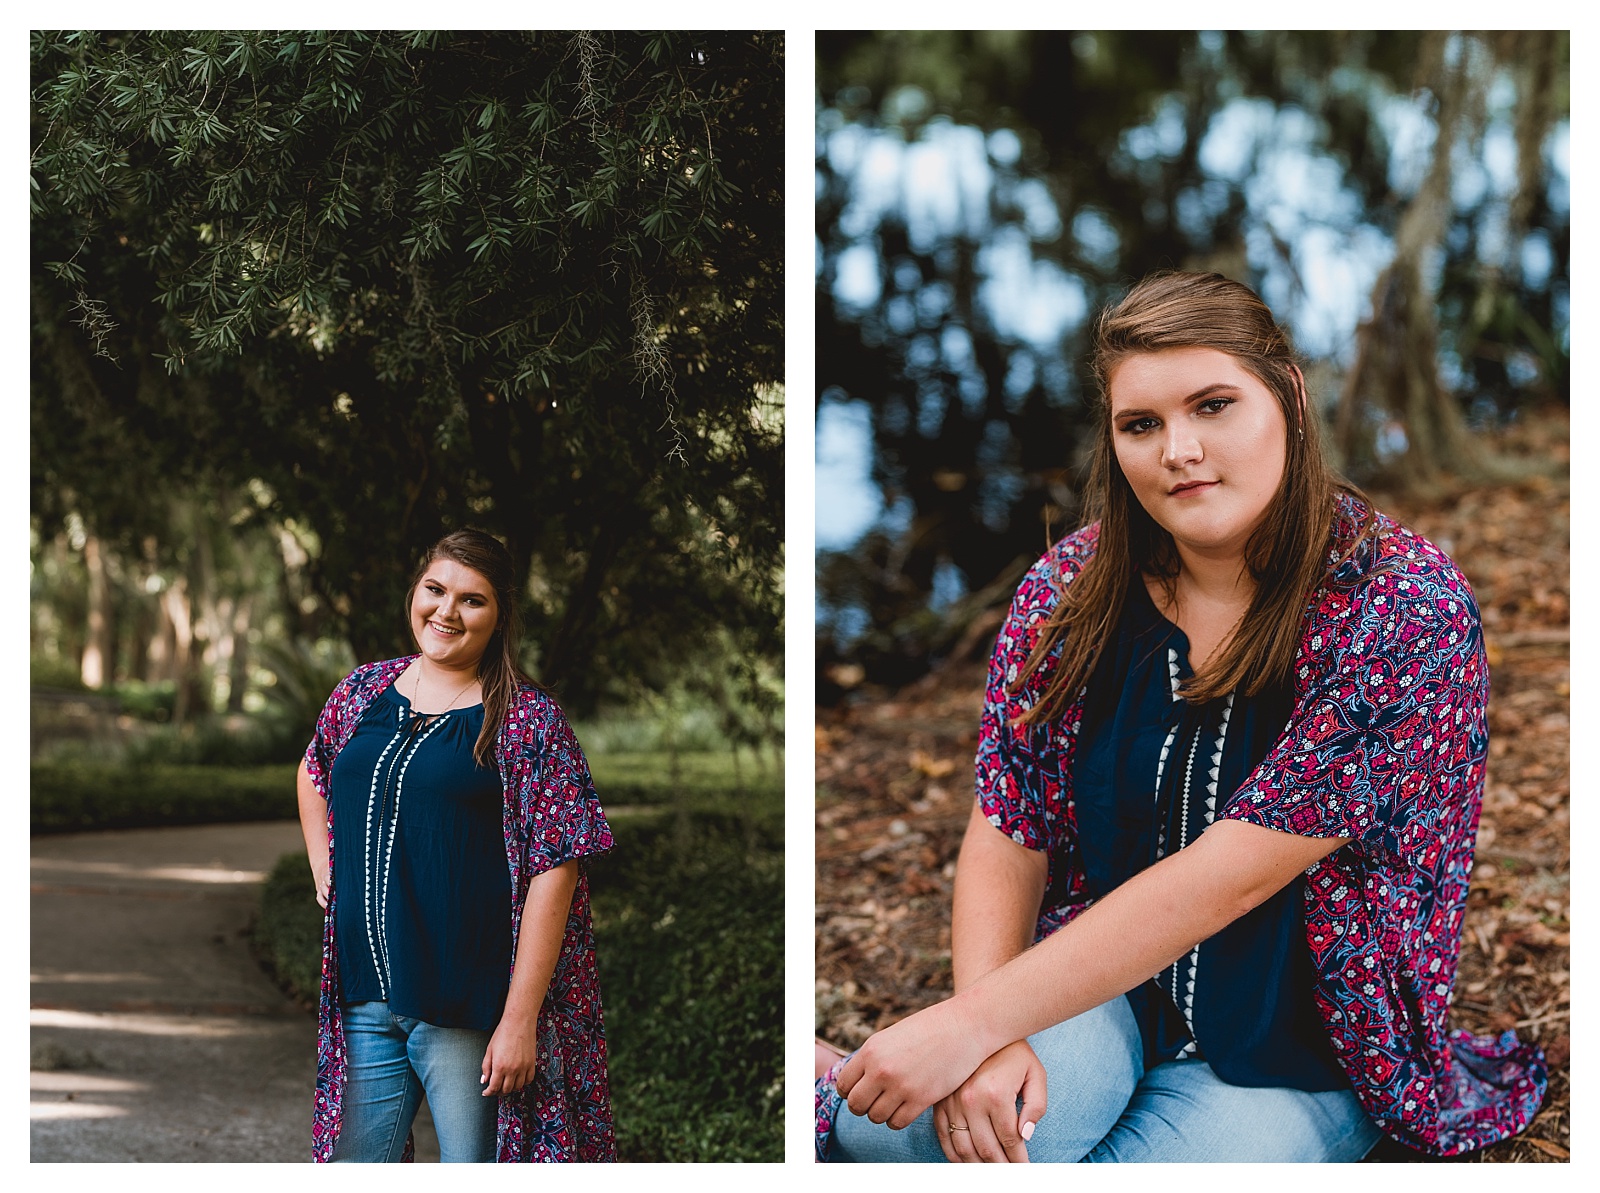 Senior photography at Lake Alice, Gainesville, FL. Shelly Williams Photography